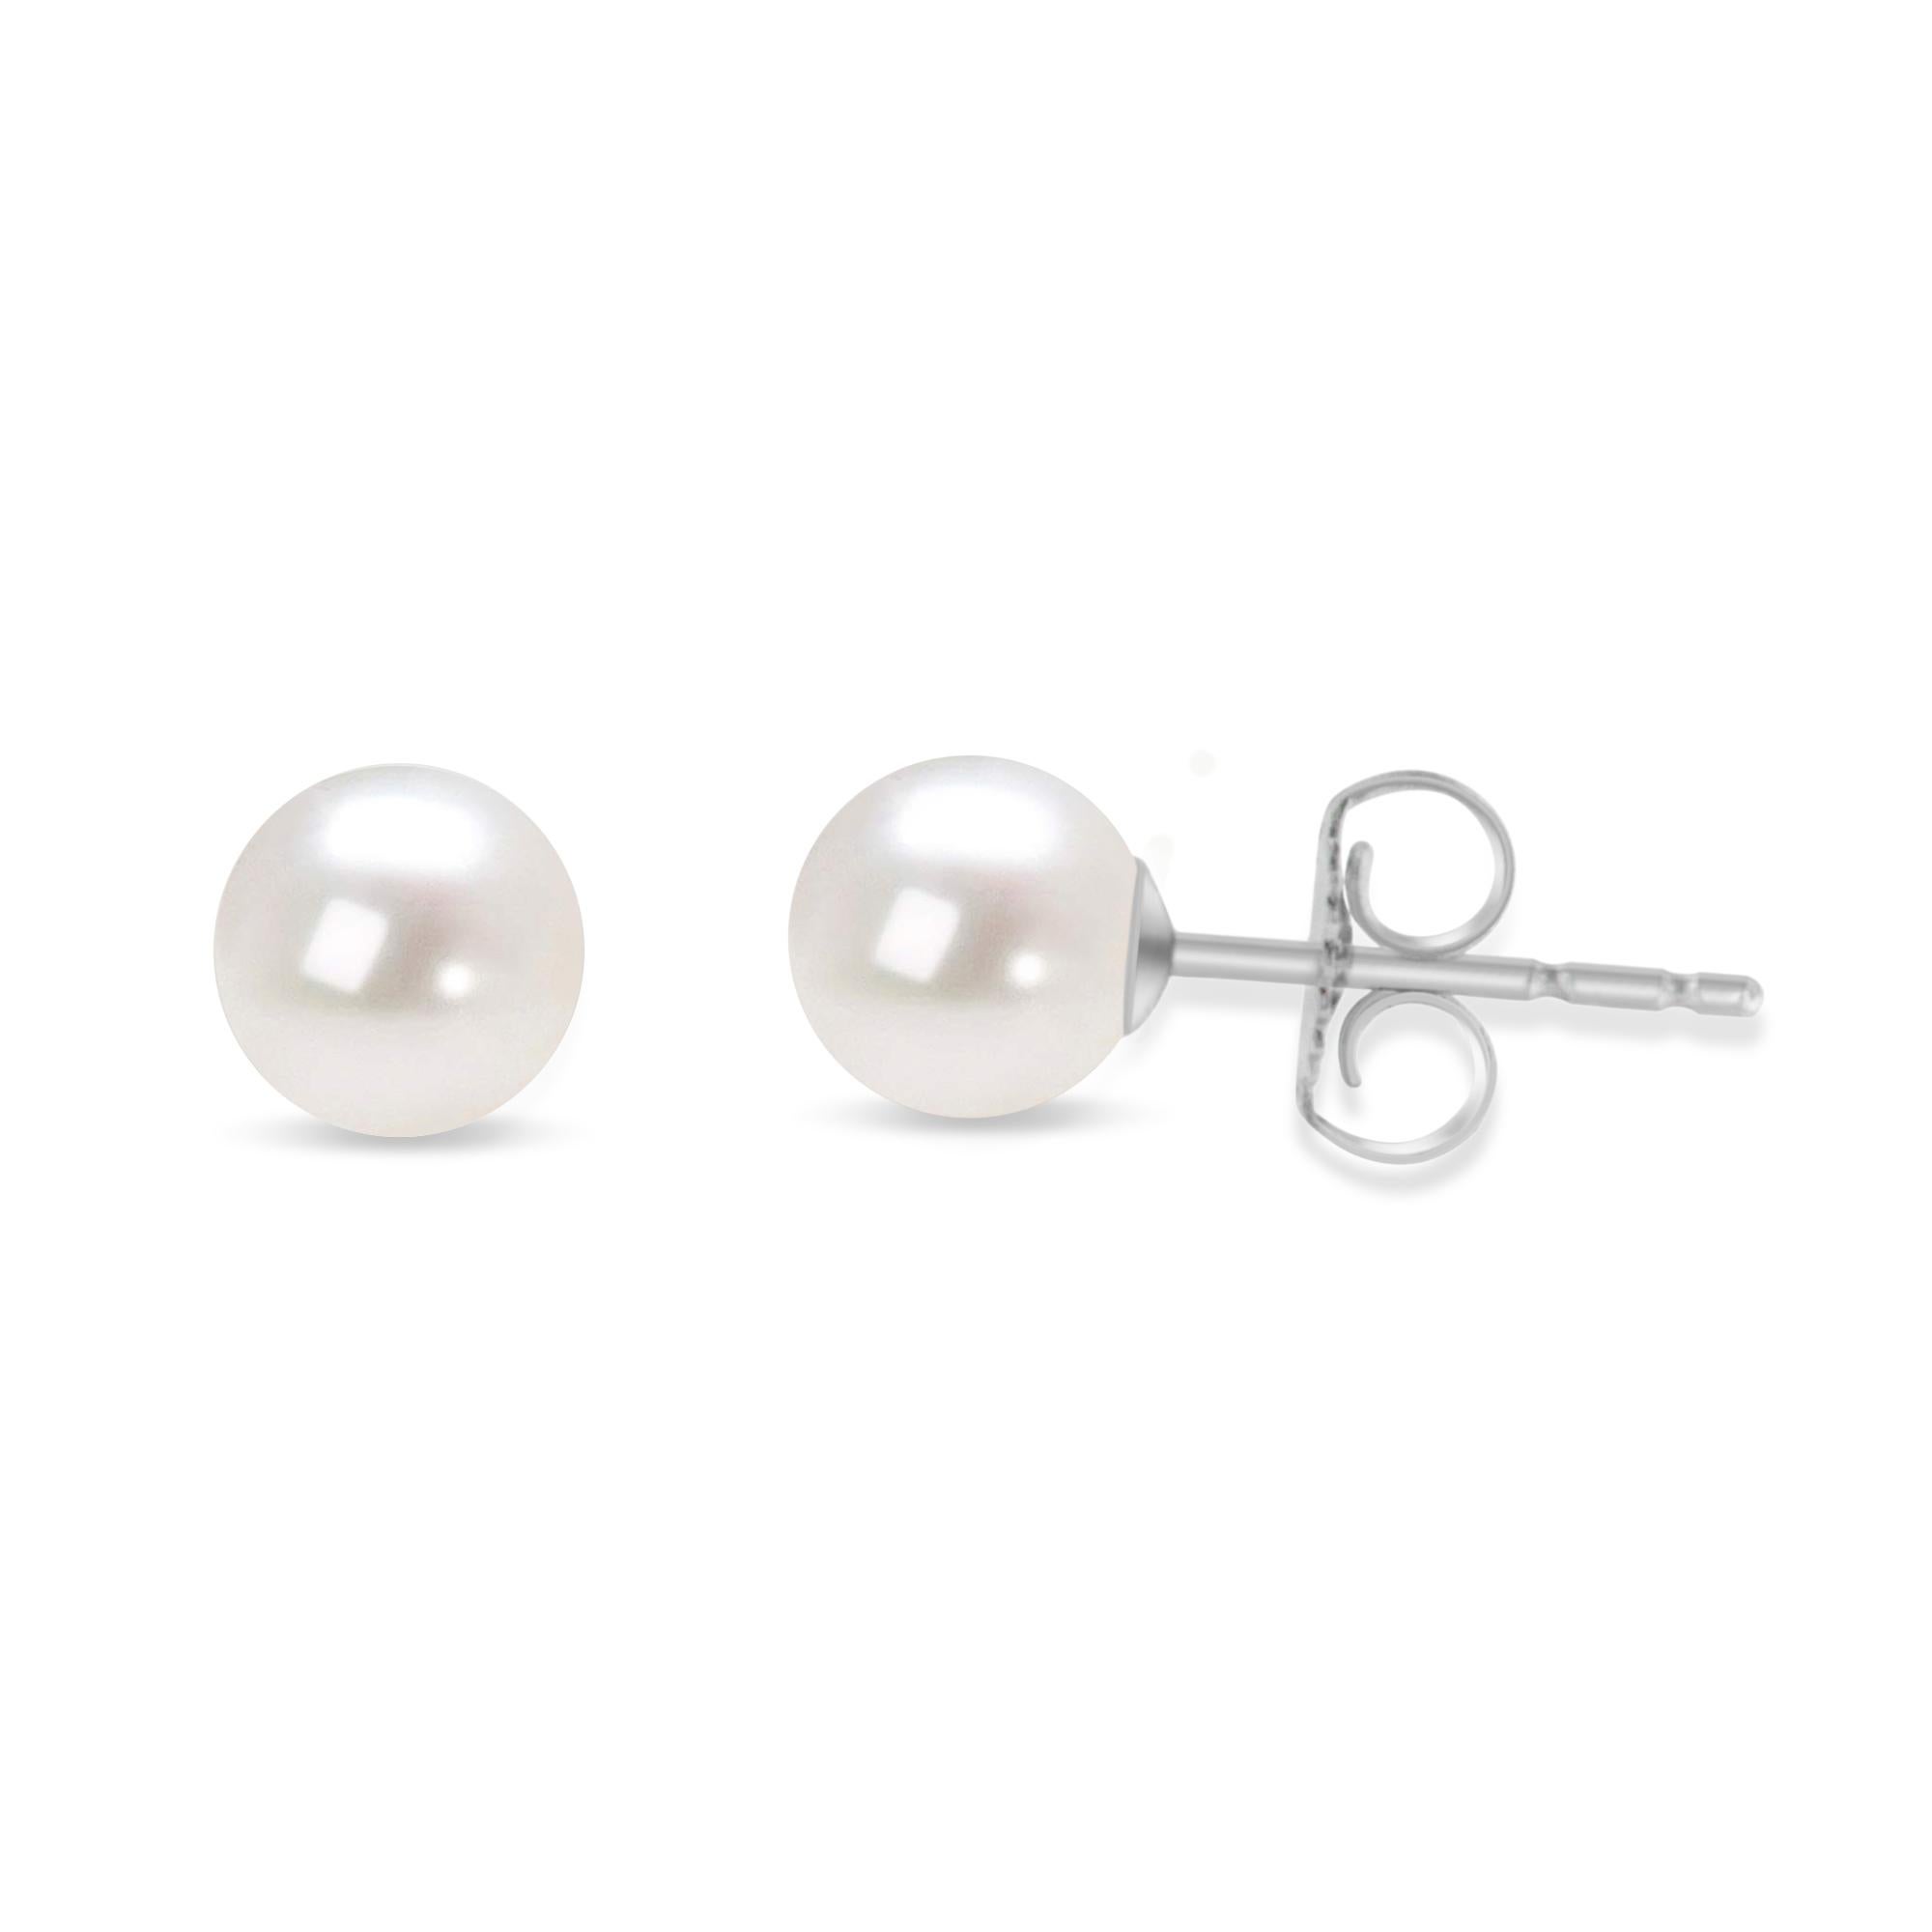 Sweet, sophisticated and seemingly simple, our stunning Akoya Pearls are totally enchanting, with an ever-vibrant luminosity dancing across their radiant surfaces. These 5-5.5MM, cultured white with pink overtone Akoya Pearls are of the highest